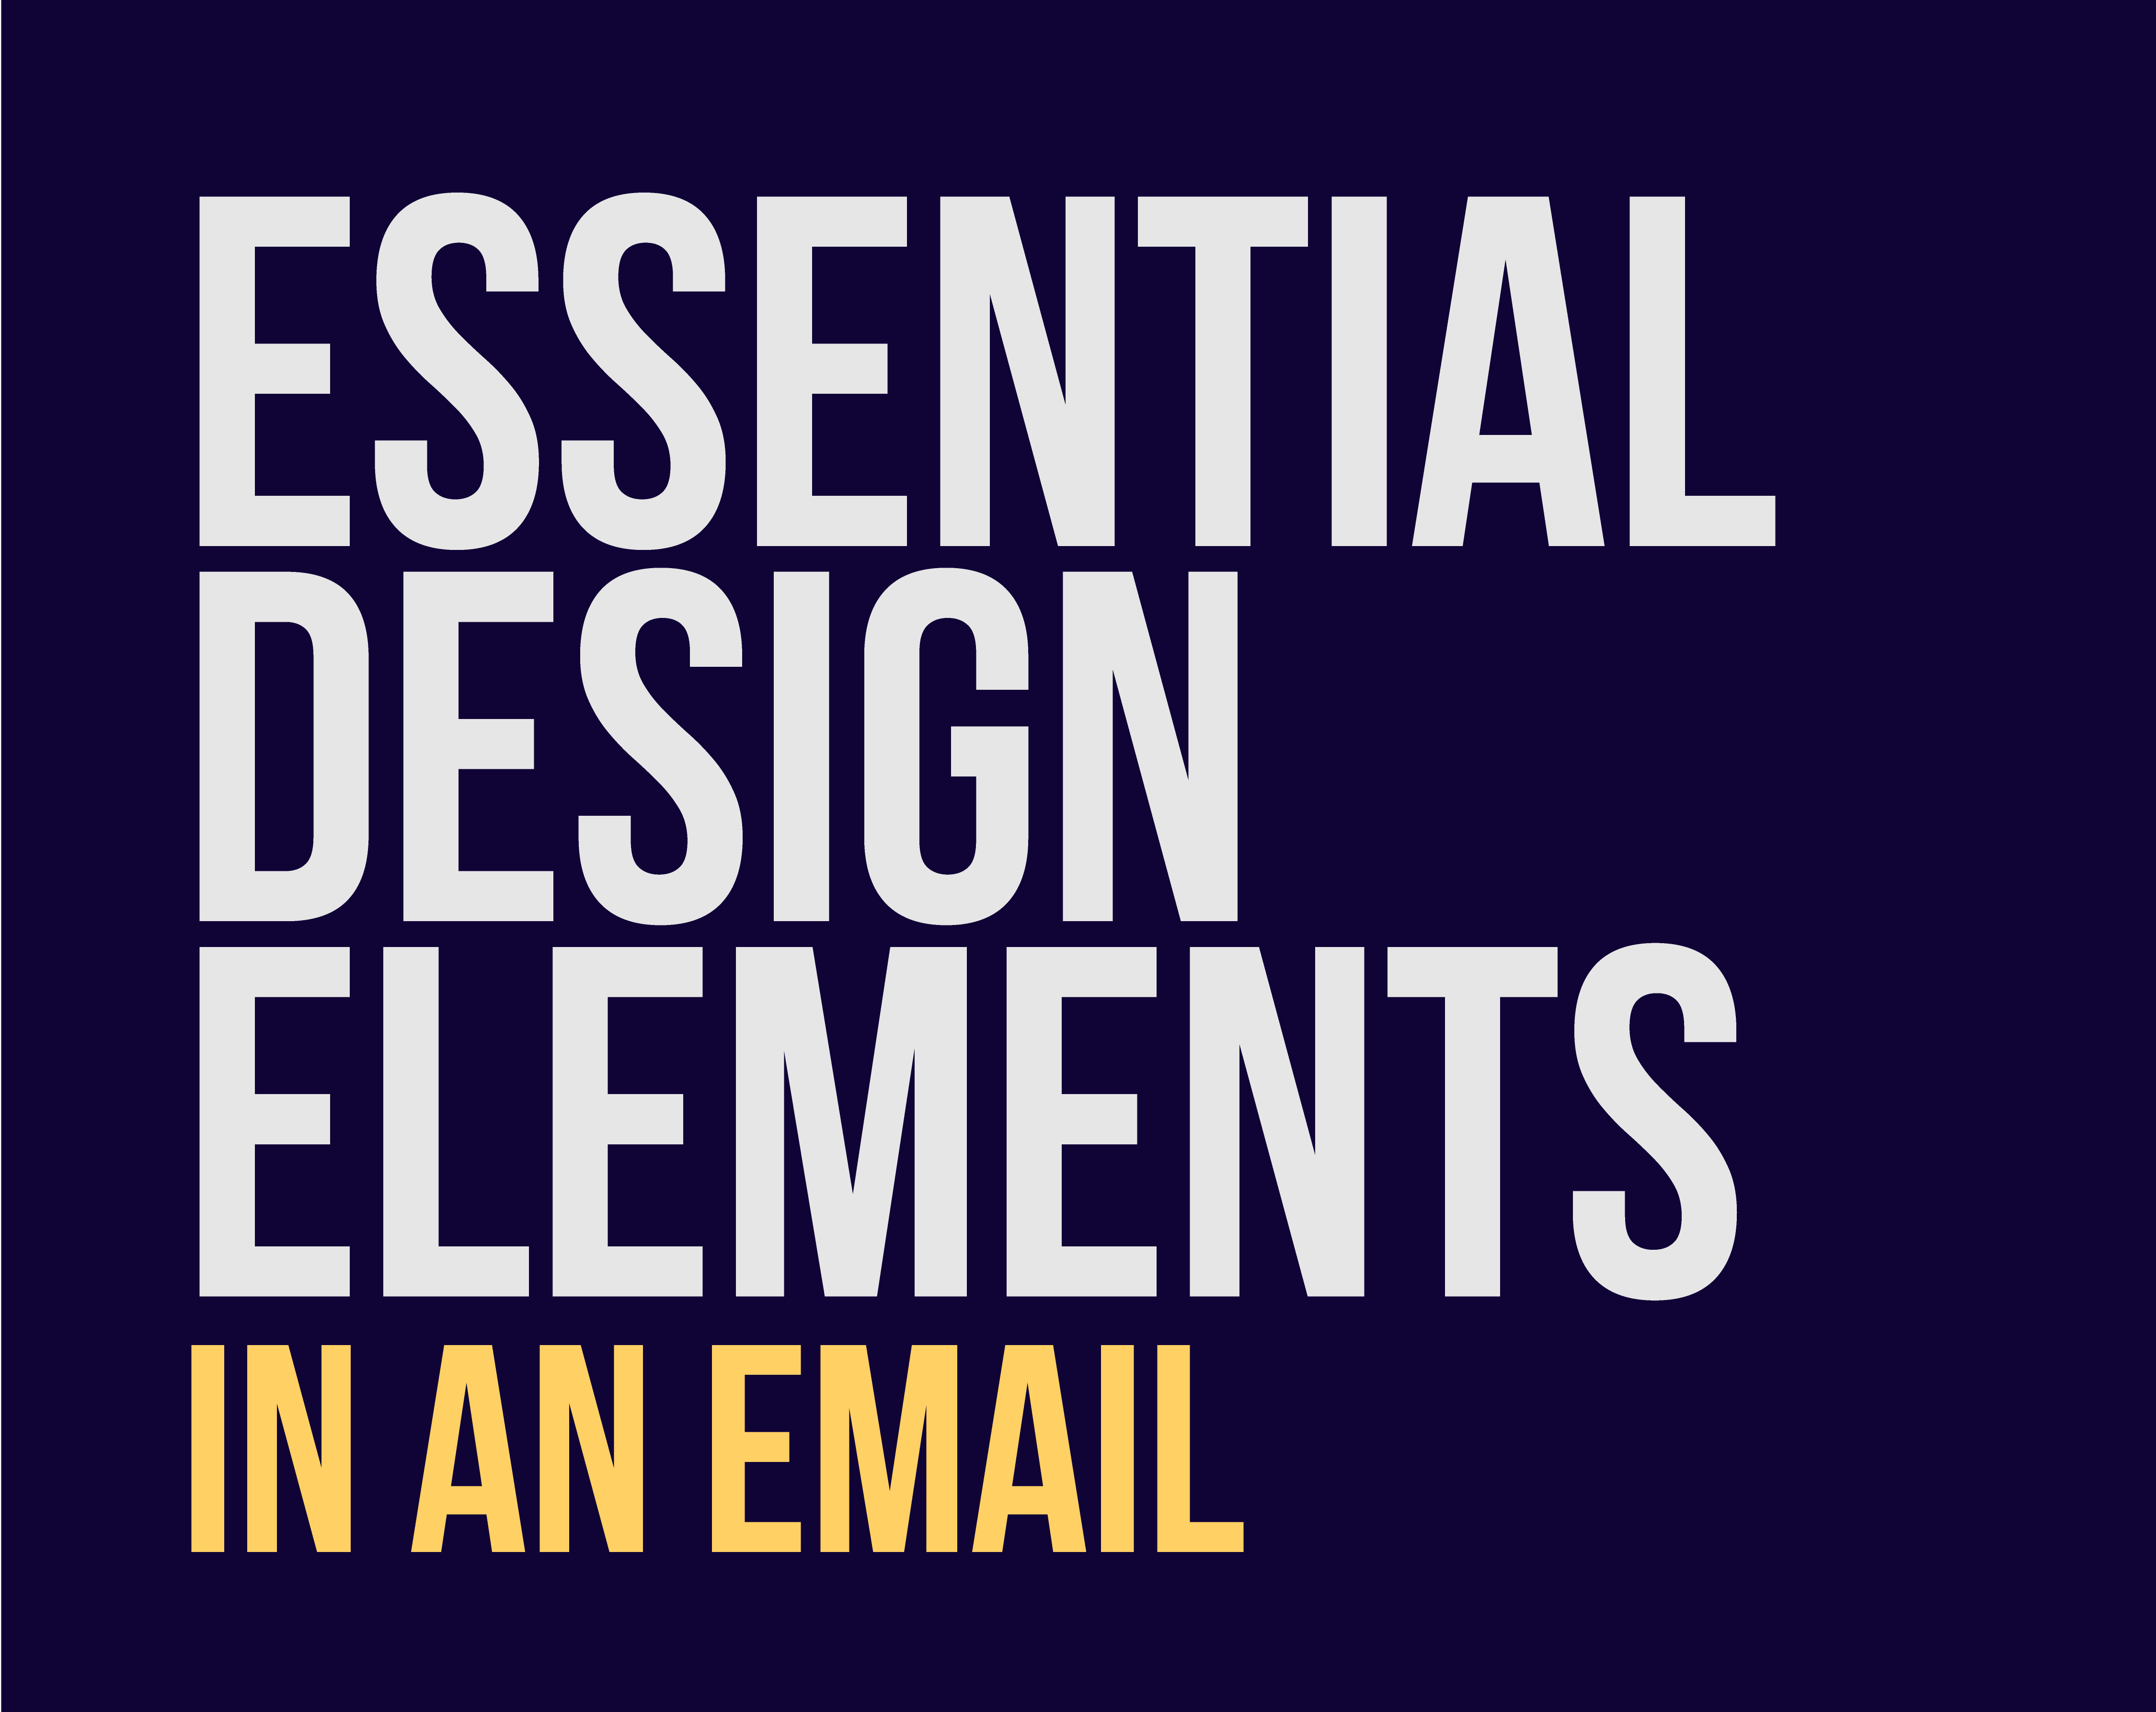 Essential Design Elements in an Email